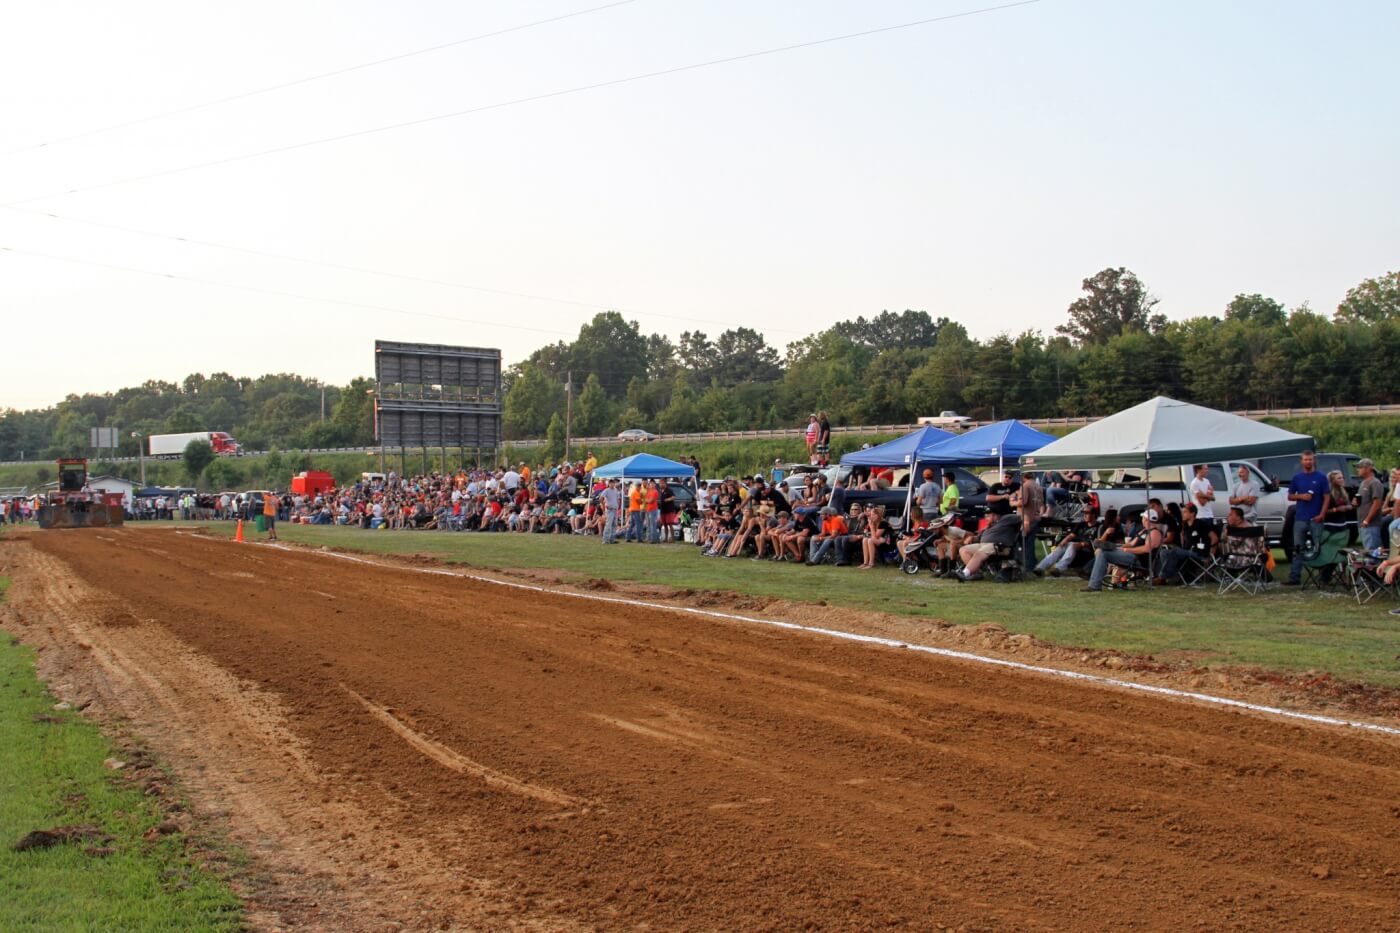 Spectators line the freshly laid pulling track waiting for the action to begin. The temporary grandstands filled quickly, forcing spectators to overflow onto the rest of the grounds.